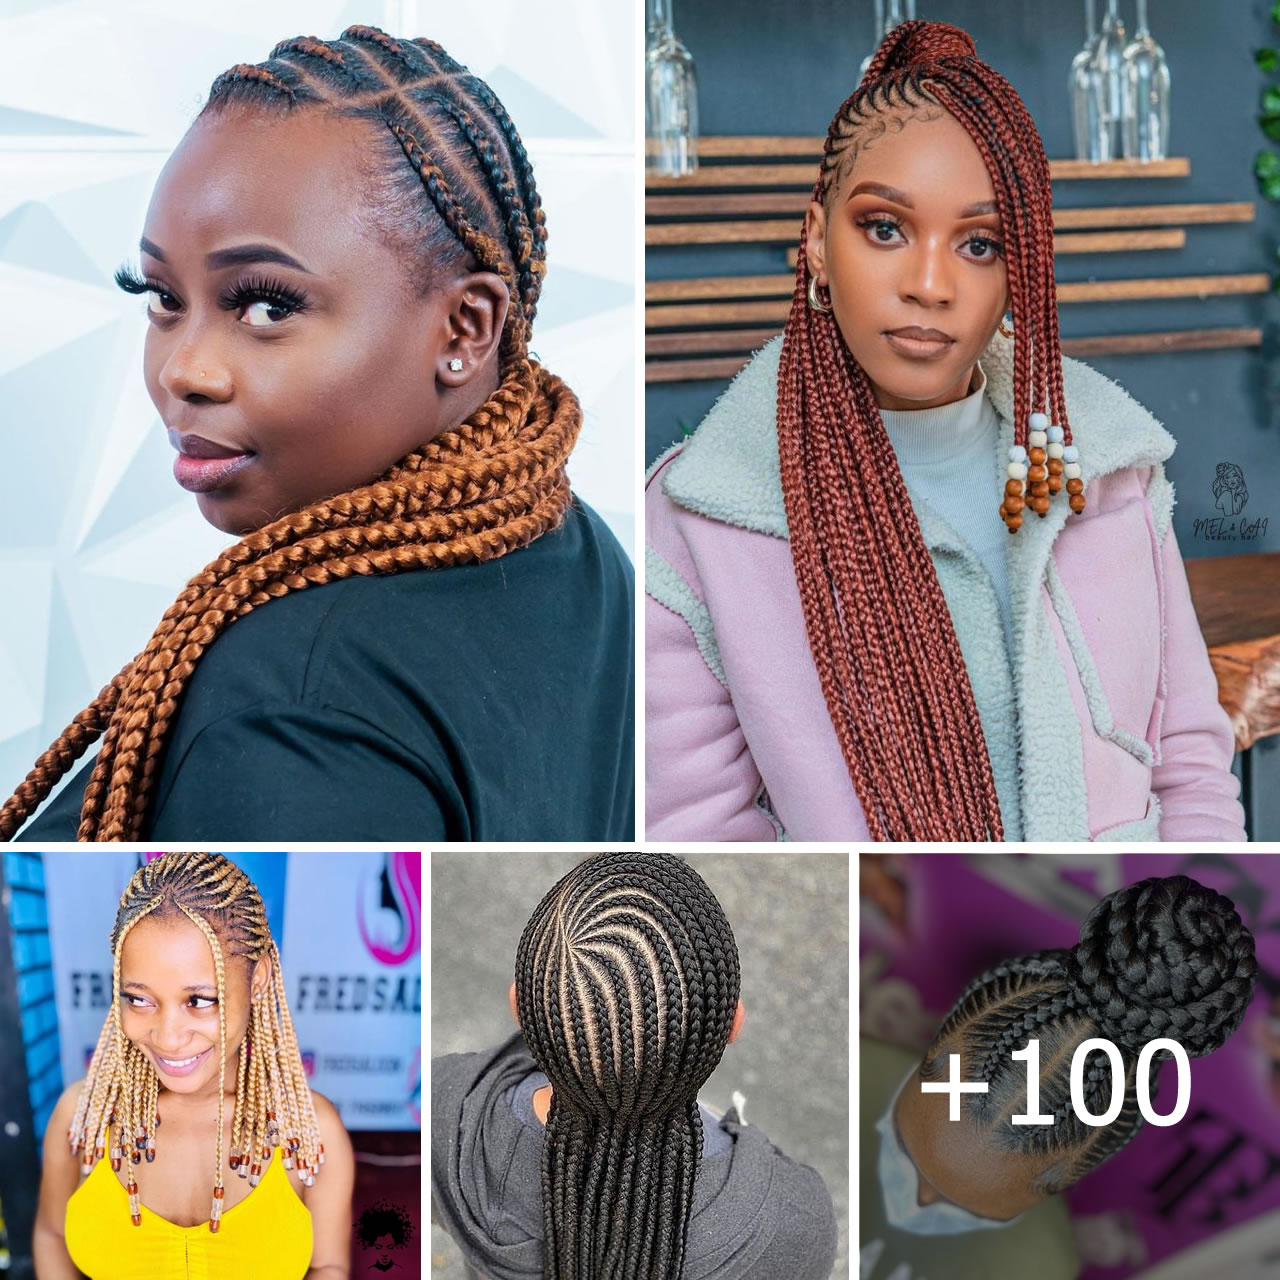 100 Different Braiding Styles: Exploring the World of Braids